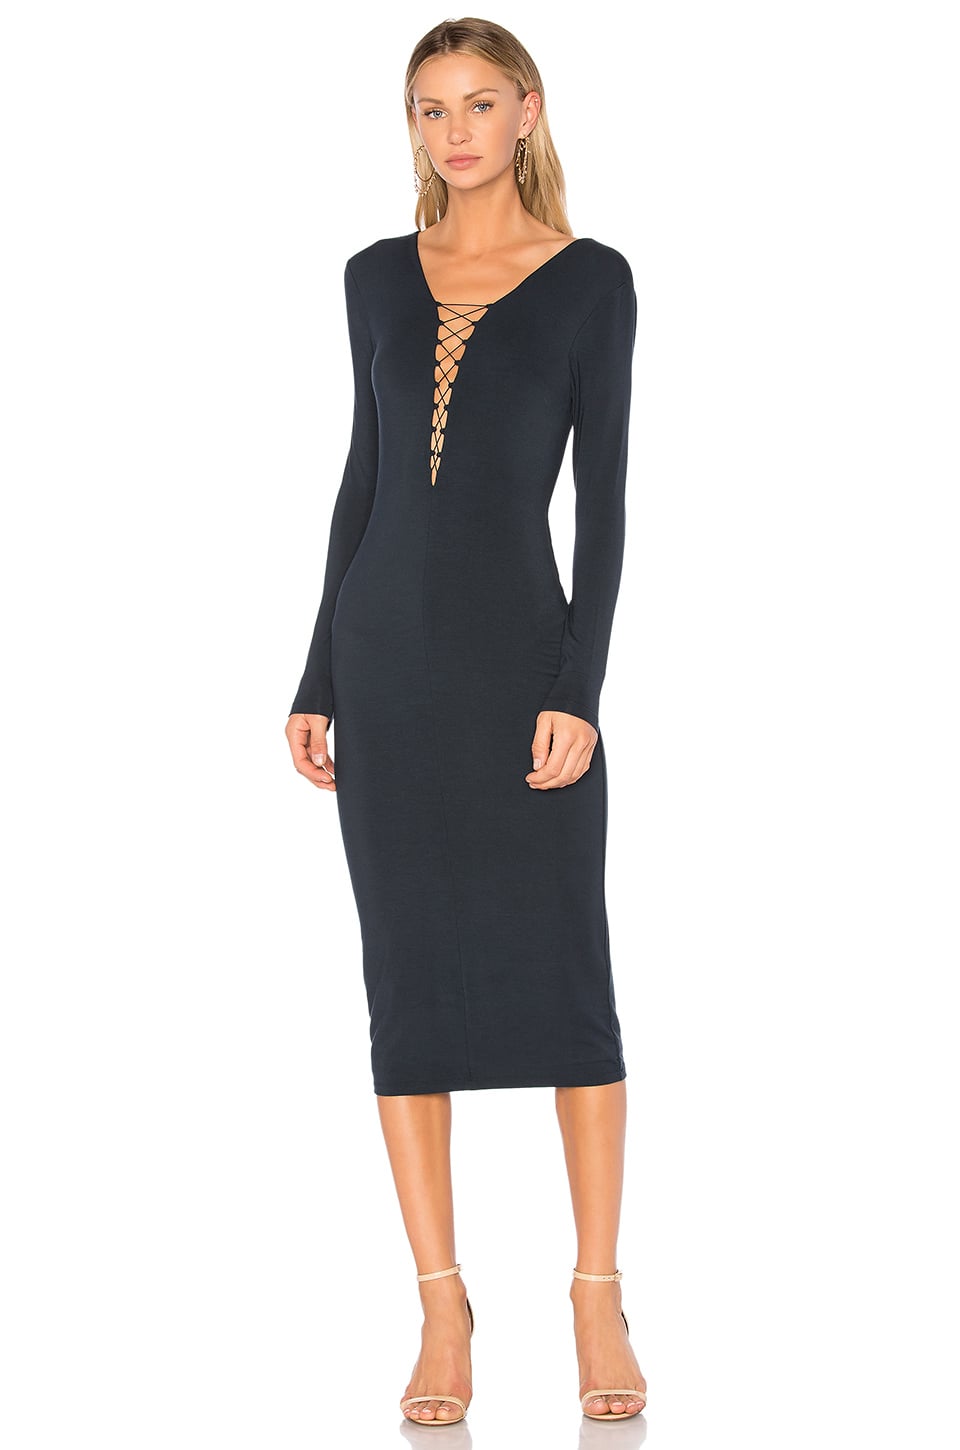 Crystal wrap top gown Alexander Wang - The Designer Club